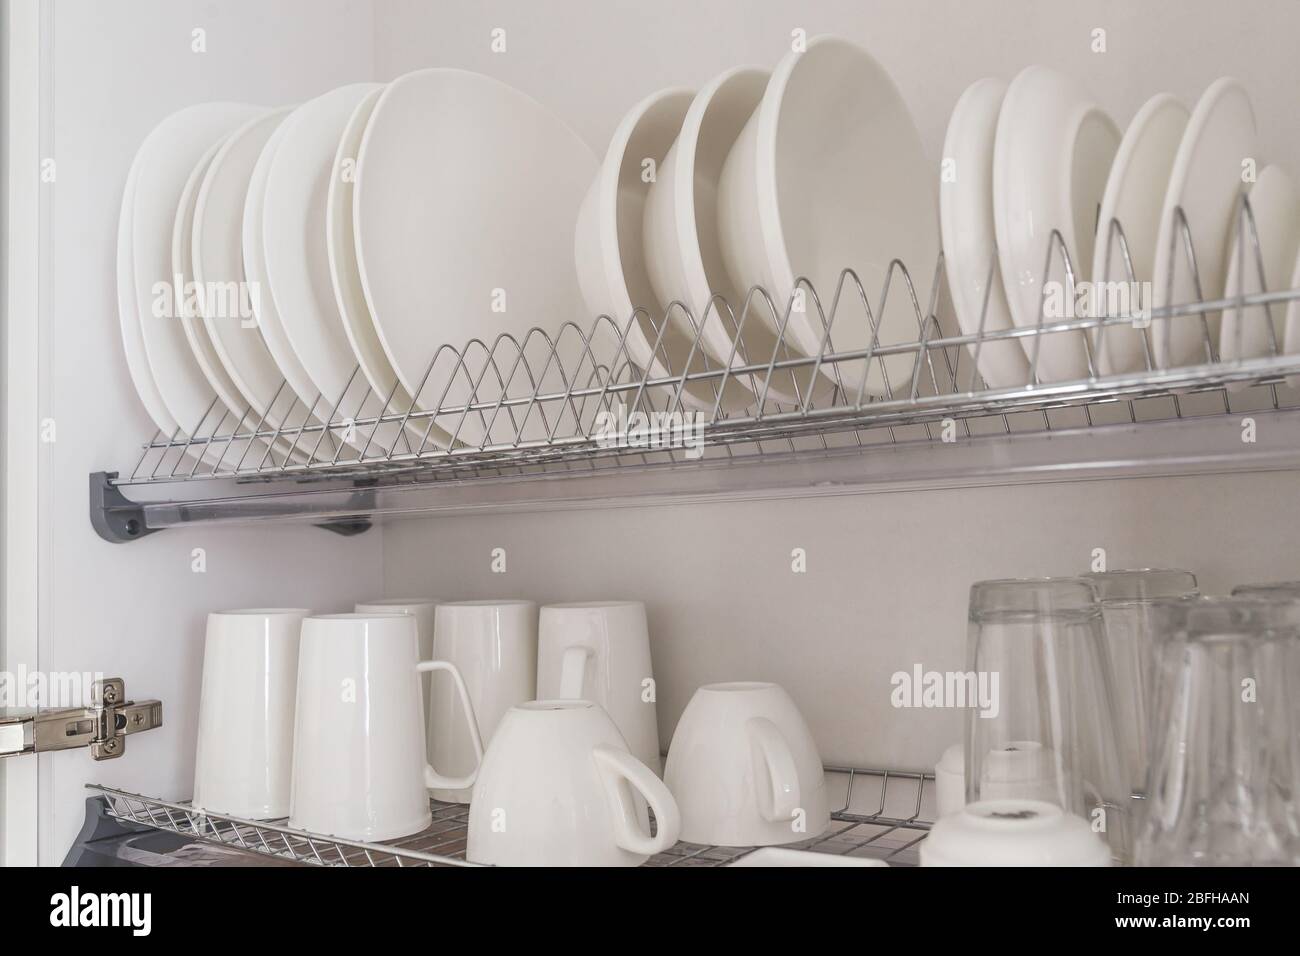 https://c8.alamy.com/comp/2BFHAAN/dish-drying-metal-rack-with-big-nice-white-clean-kitchenware-traditional-wall-cabinet-kitchen-2BFHAAN.jpg